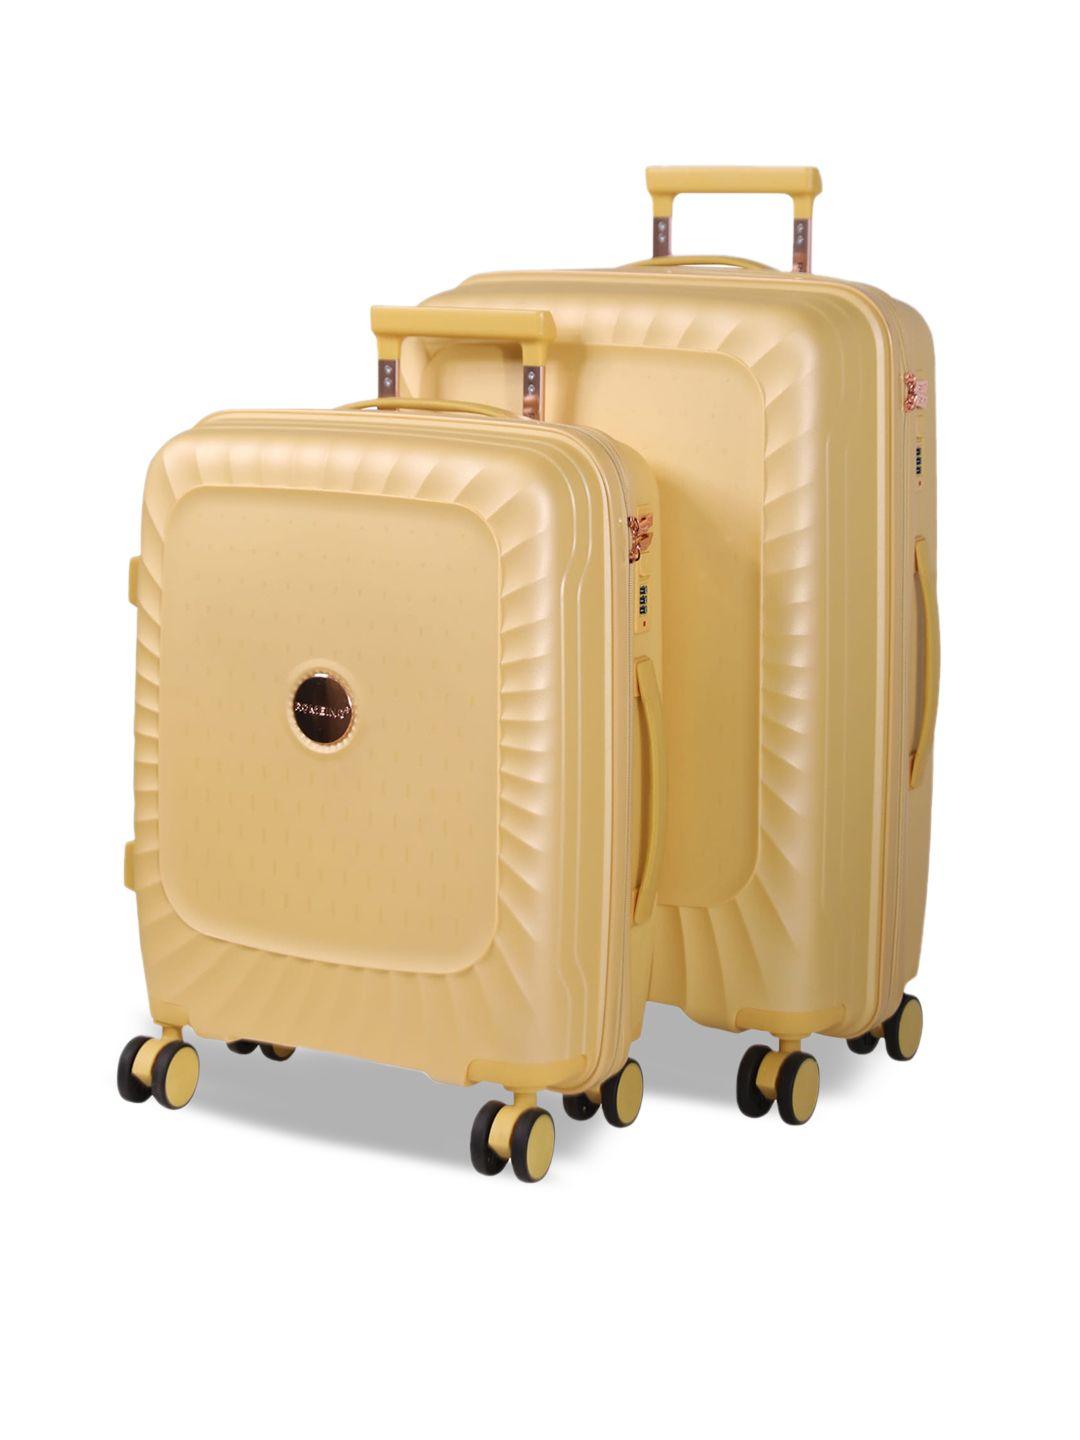 romeing sicily set of 2 textured hard-sided trolley suitcase